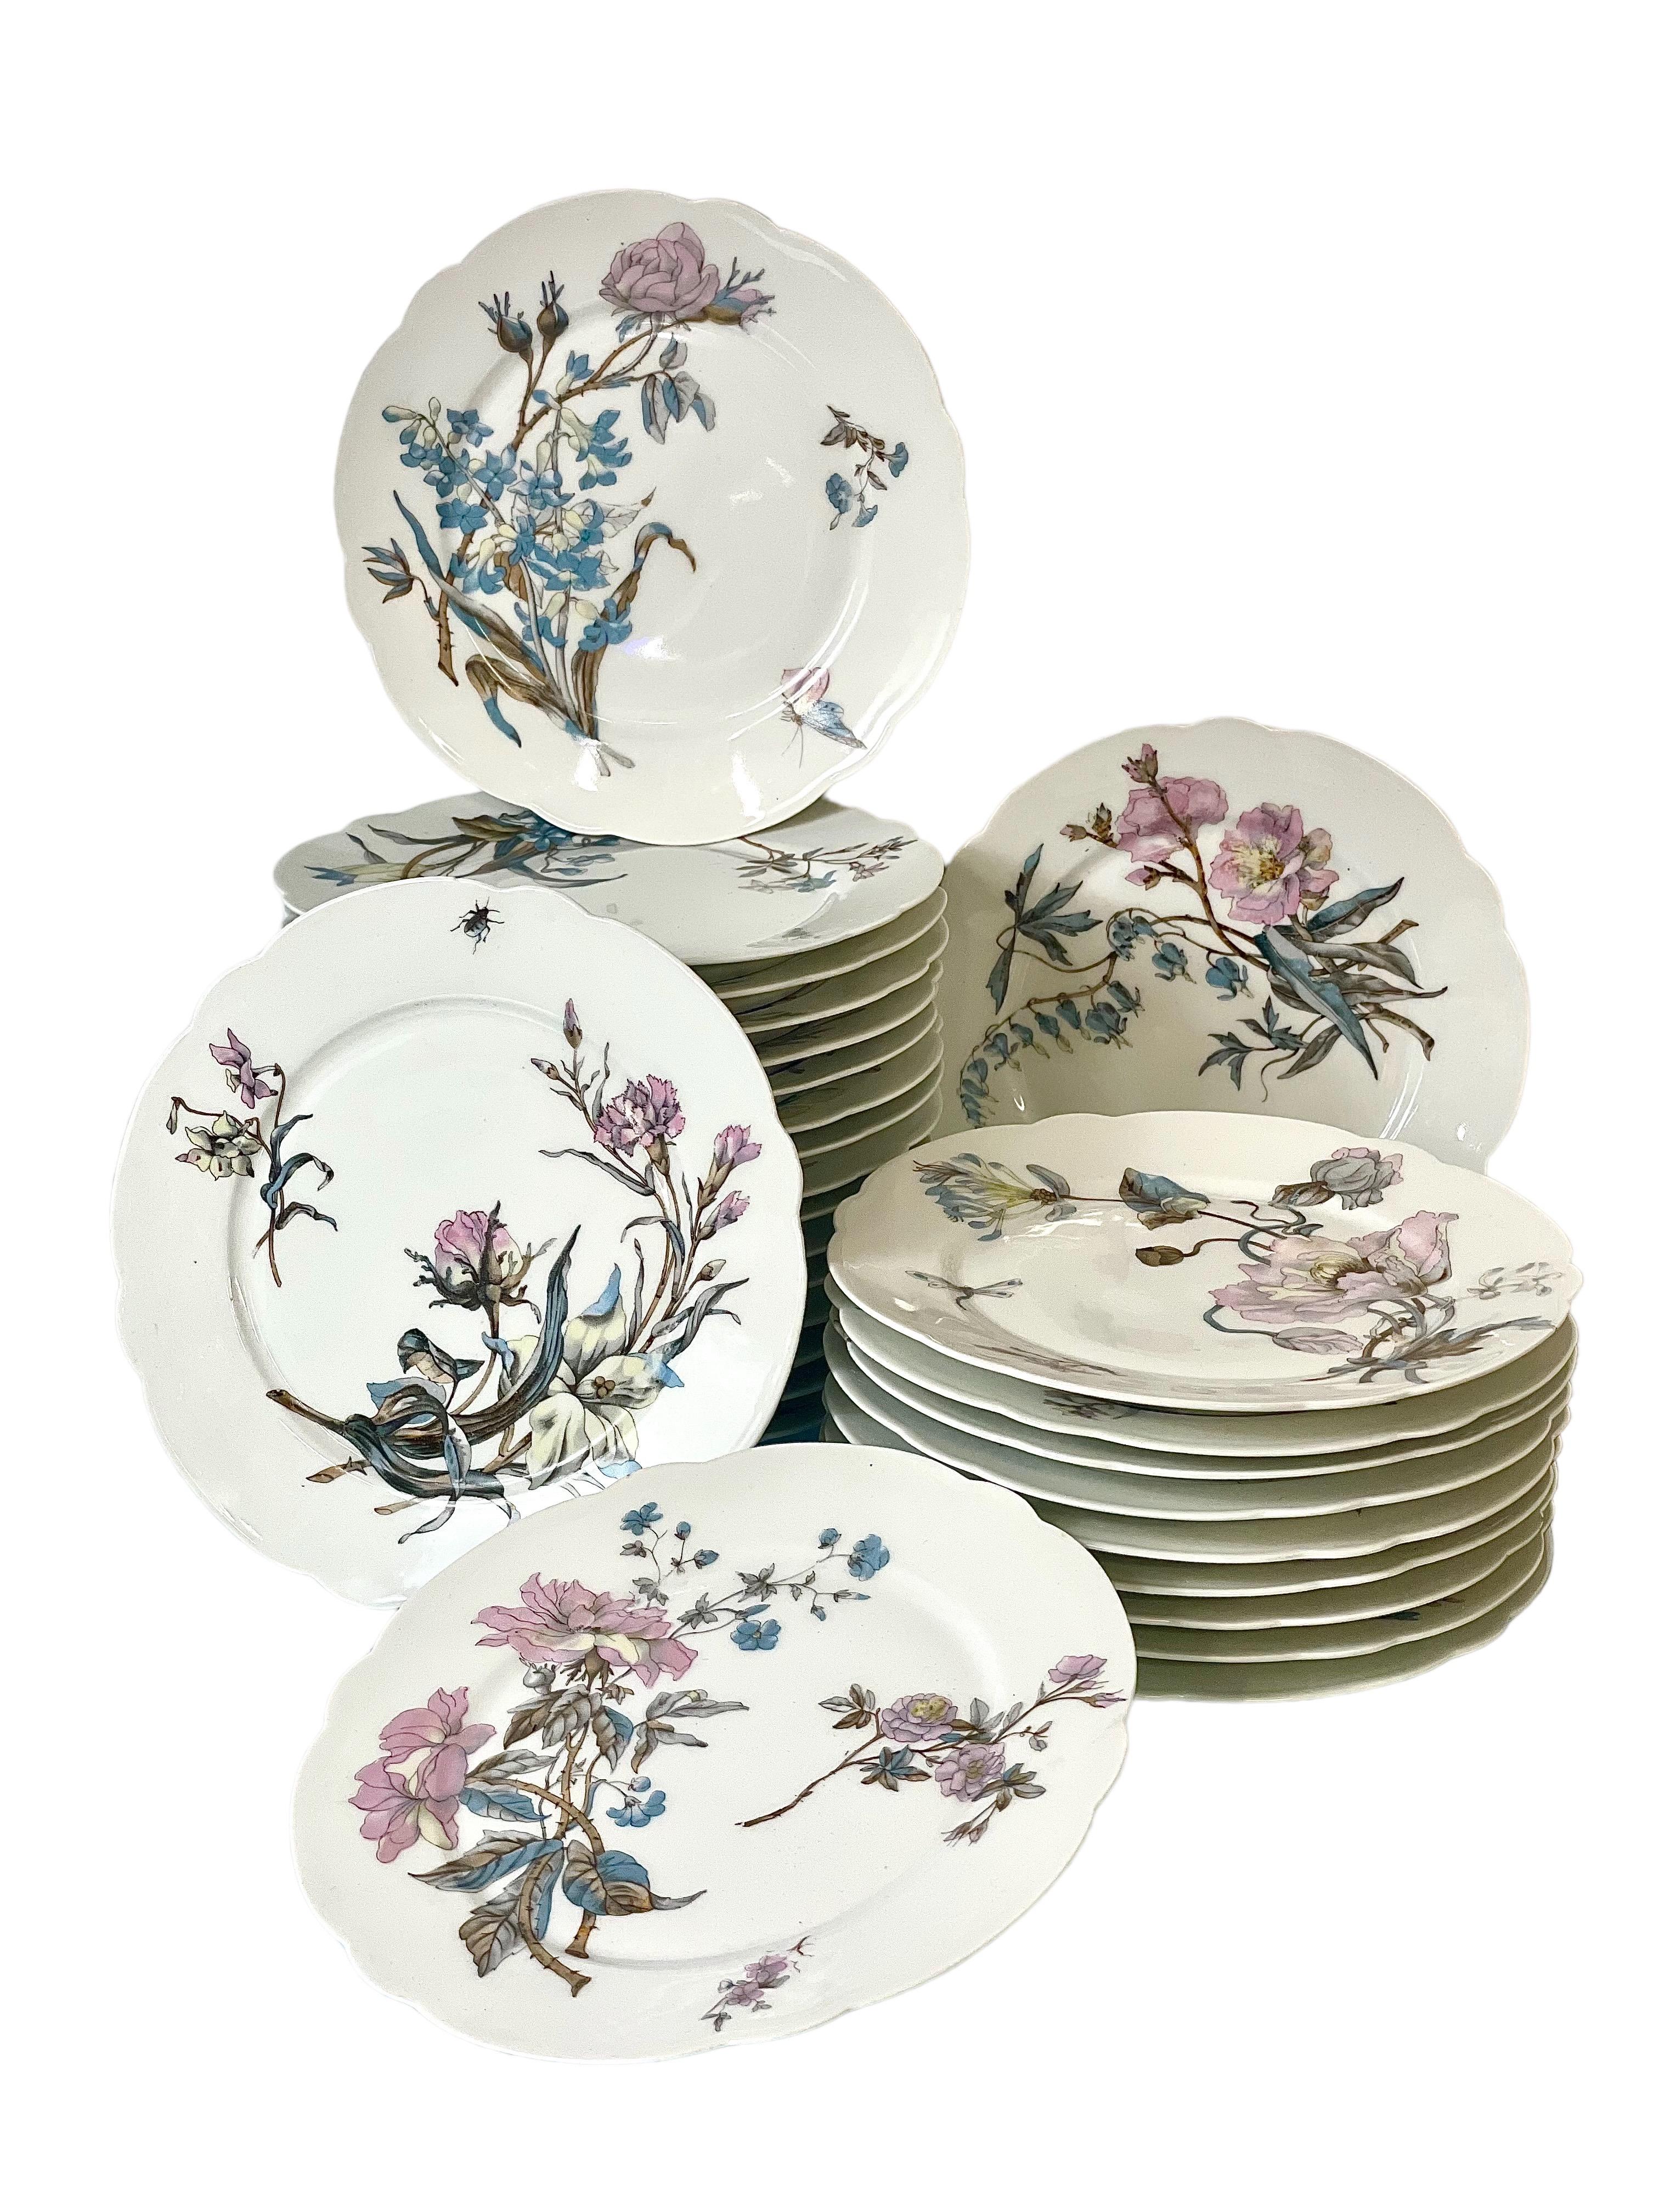 102-Piece Porcelain Dinner Service with Flowers and Butterflies 7